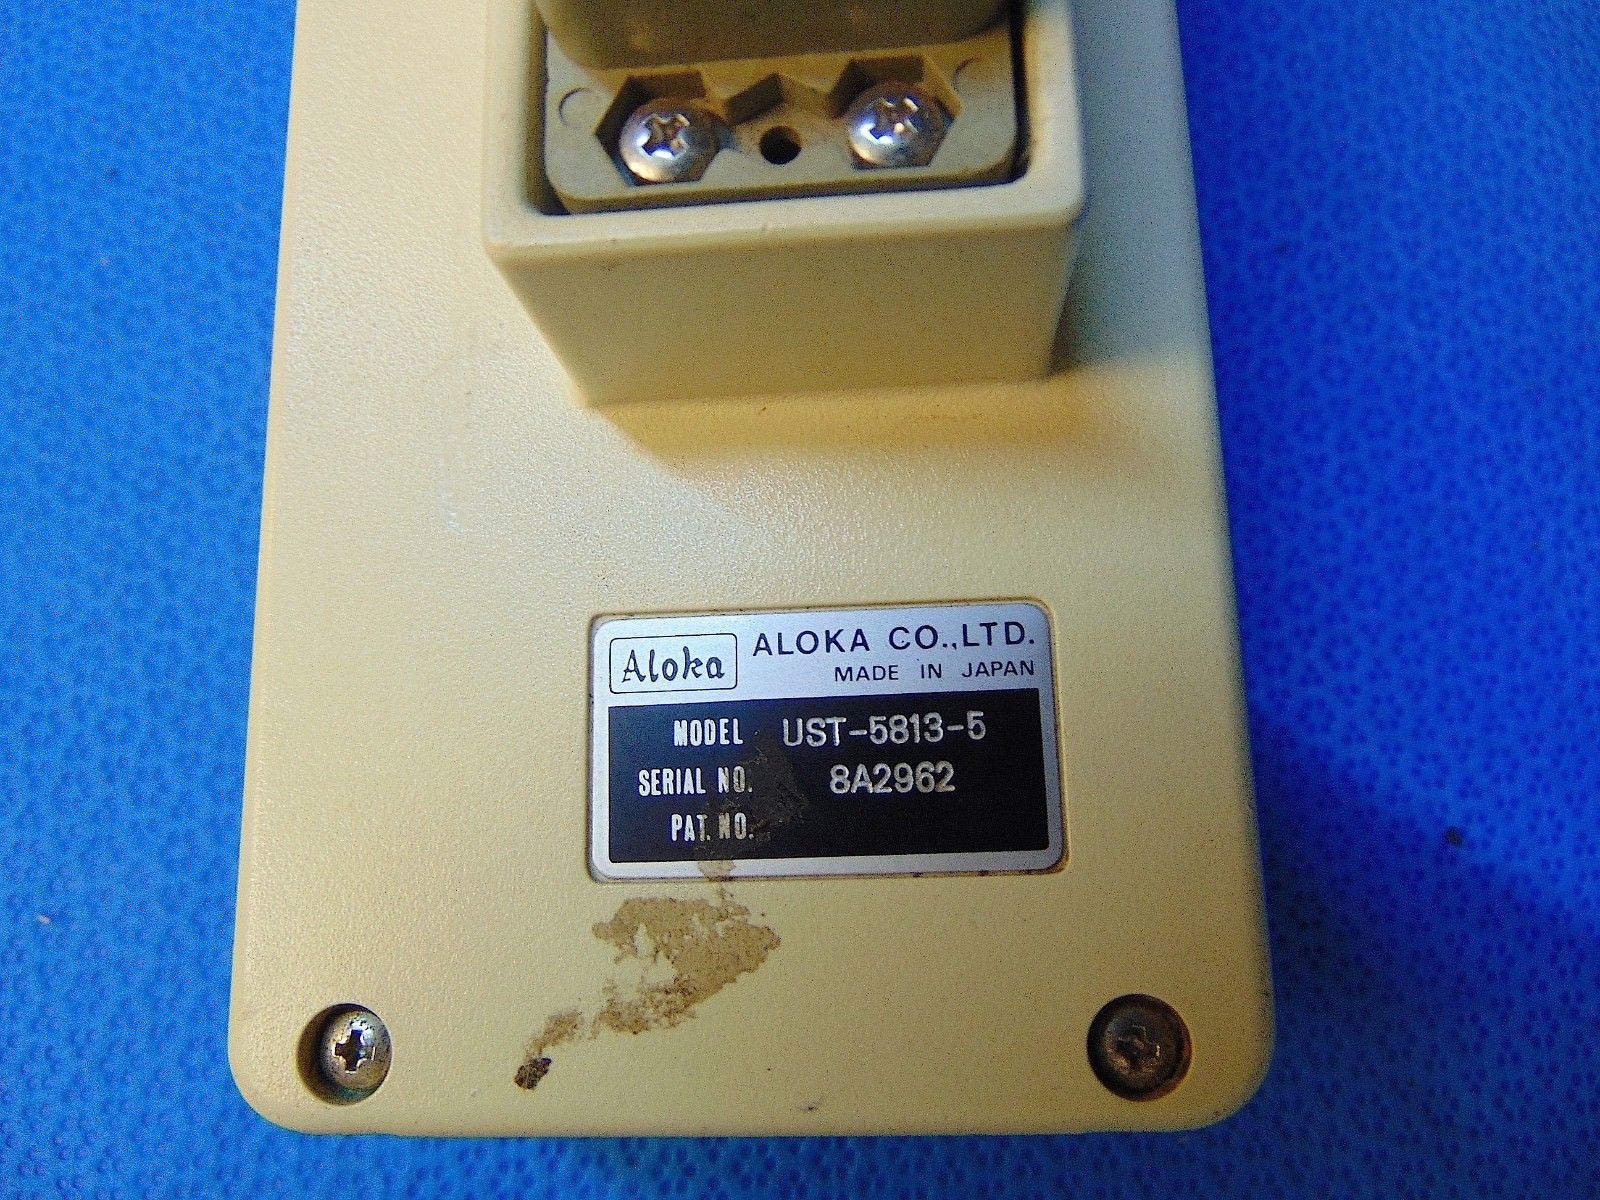 Aloka UST-5813-5 Ultrasound Probe 5 MHz Carry Case Included RH244 DIAGNOSTIC ULTRASOUND MACHINES FOR SALE